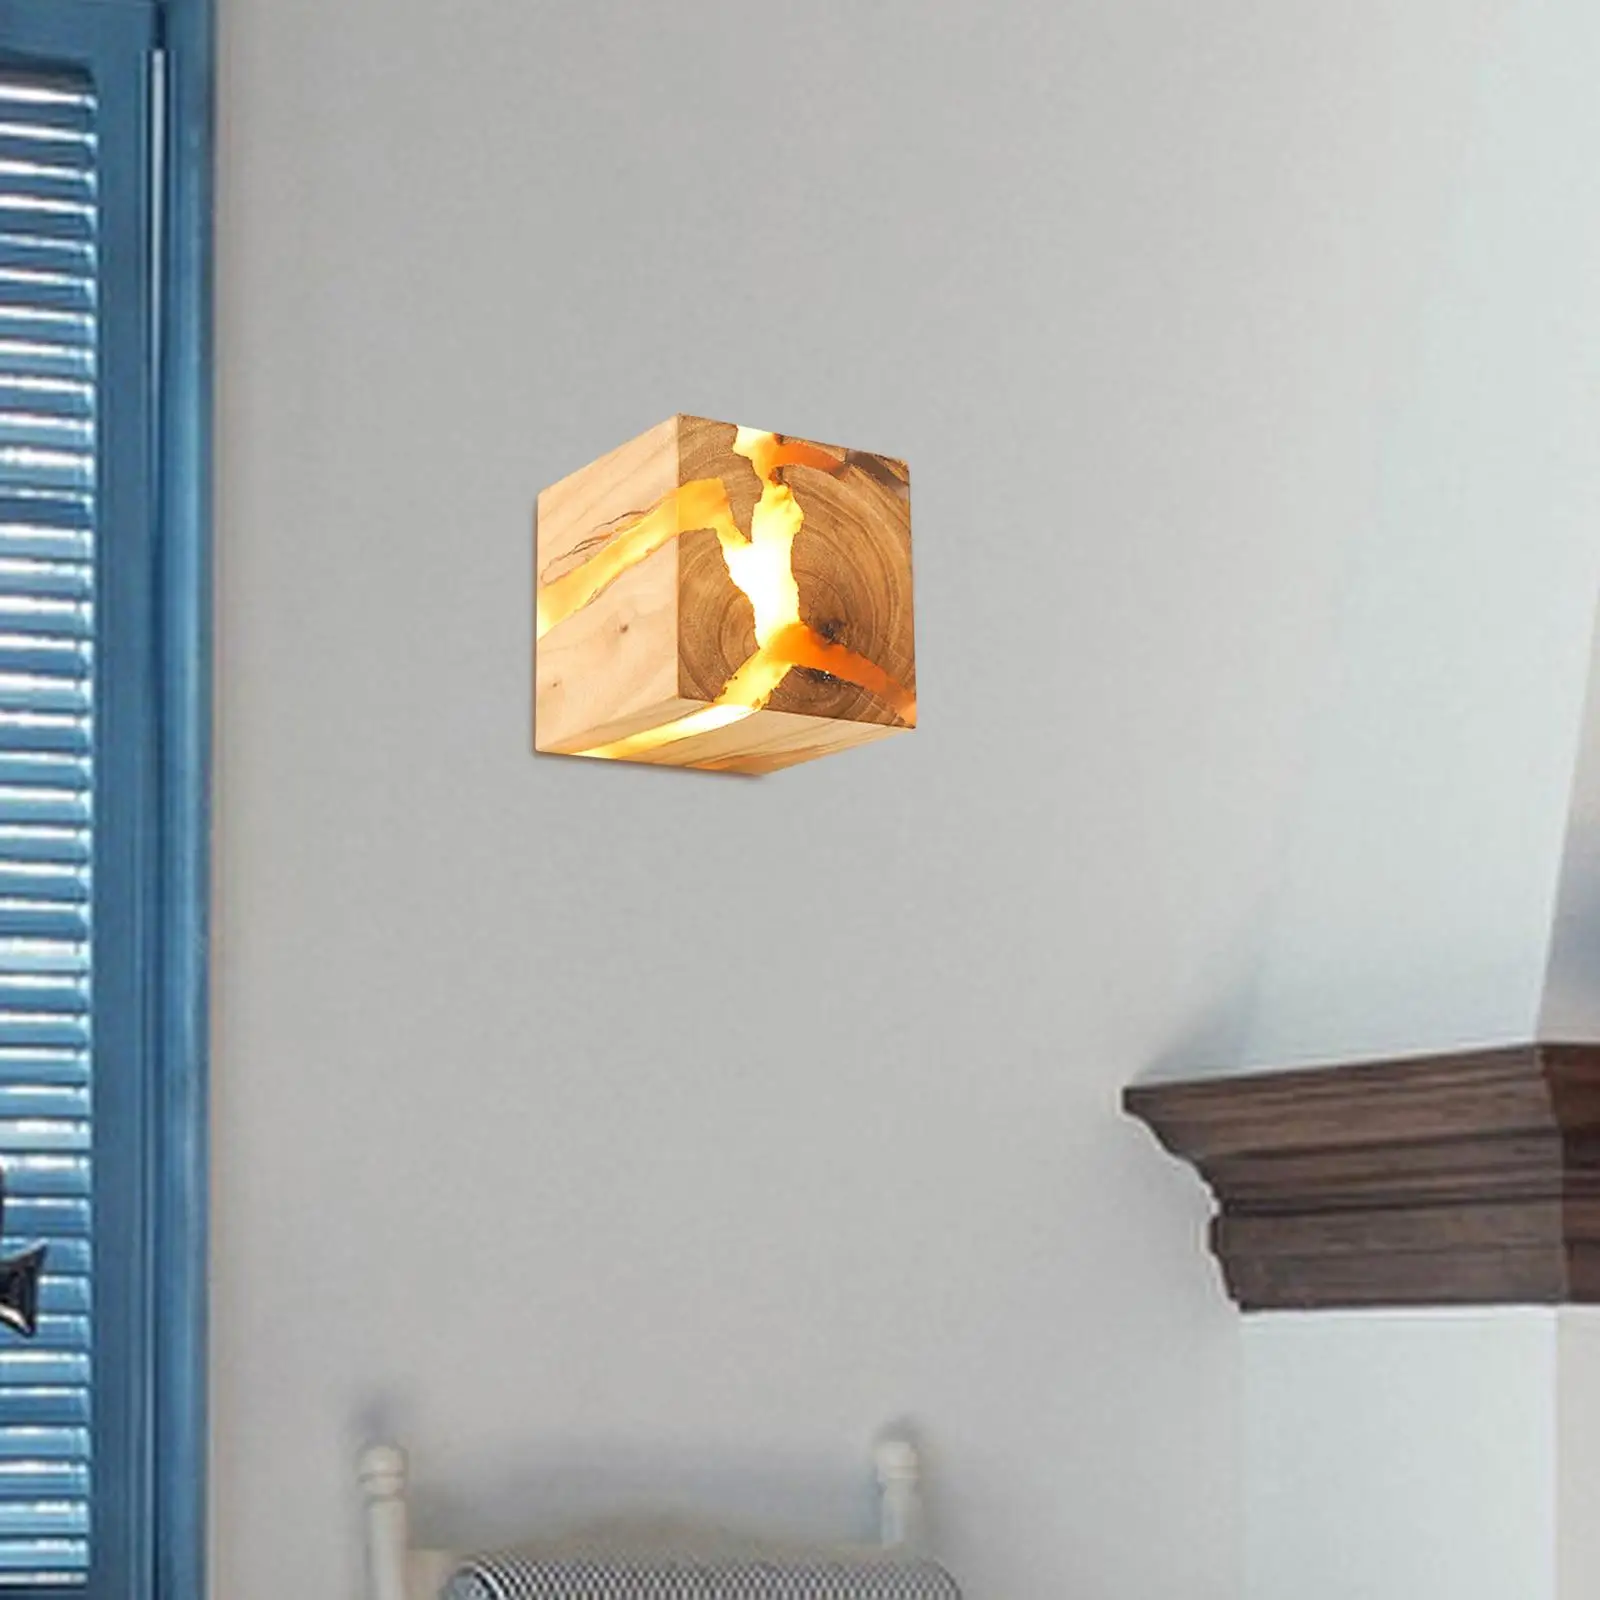 Wood Resin Wall Light Fashionable Decorative LED for Home Bedroom Restaurant Decor